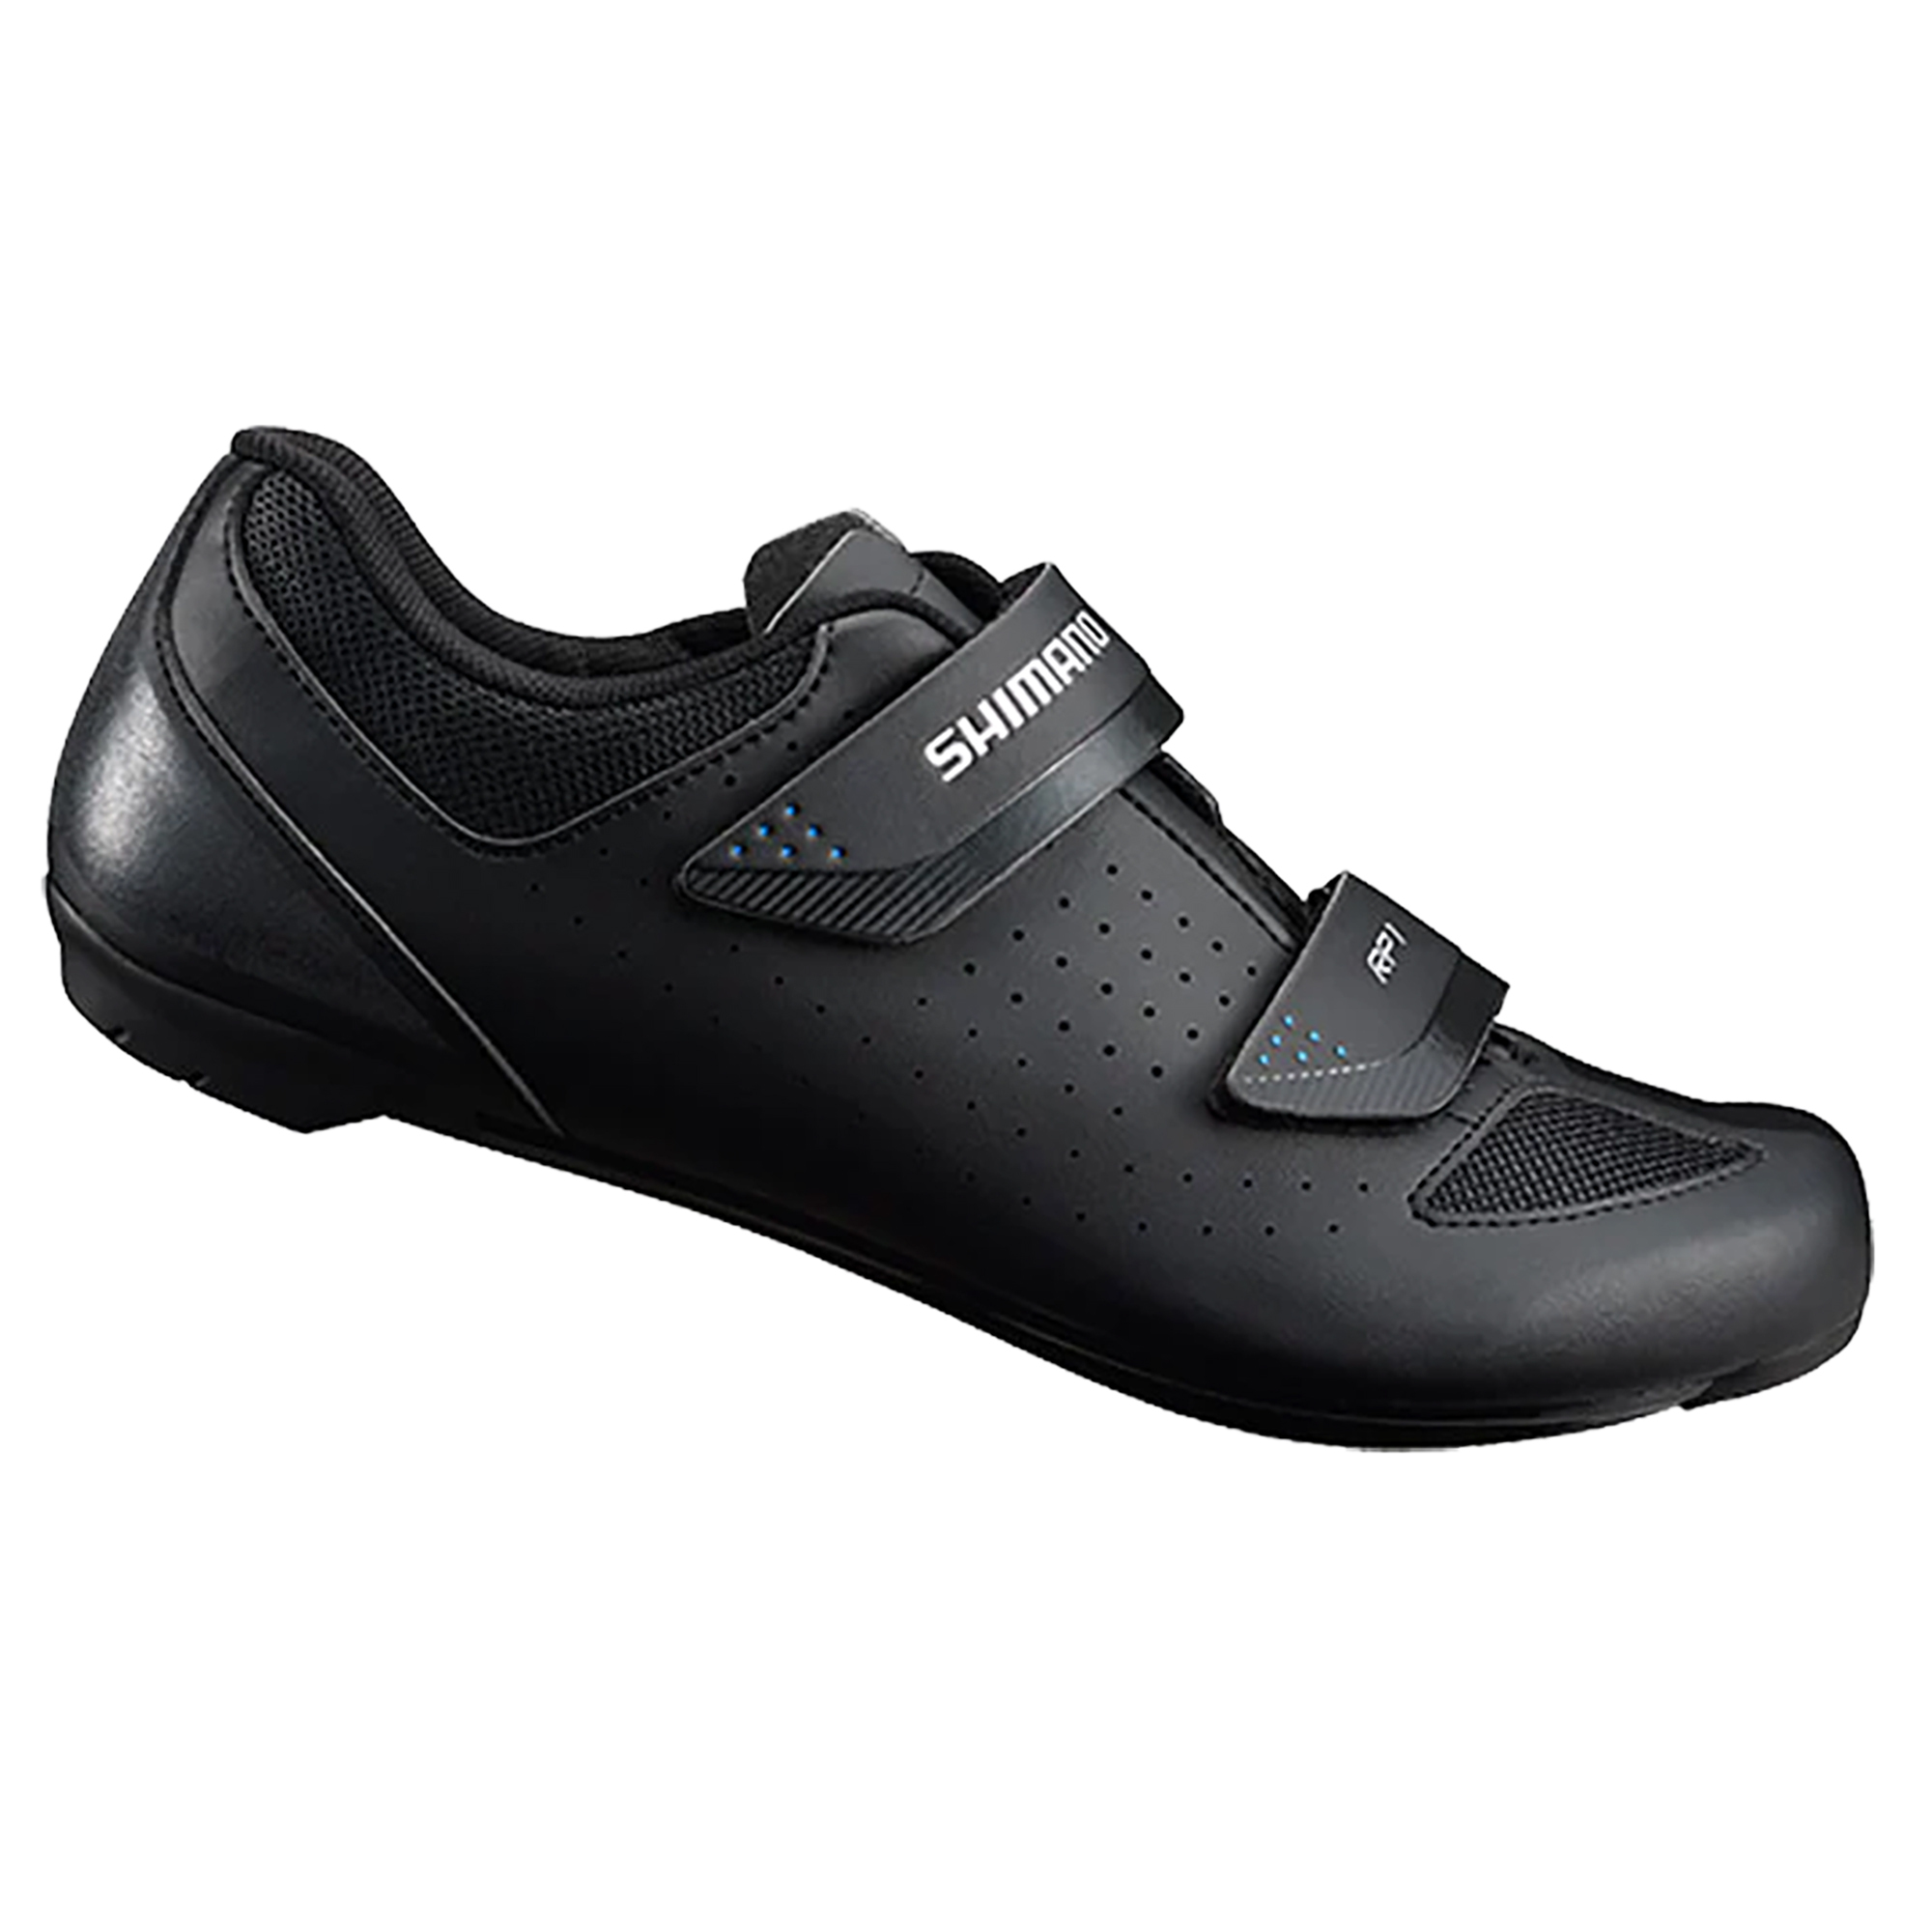 Shimano RP1 Road Bicycle Shoes For SPD SL Black Size 42